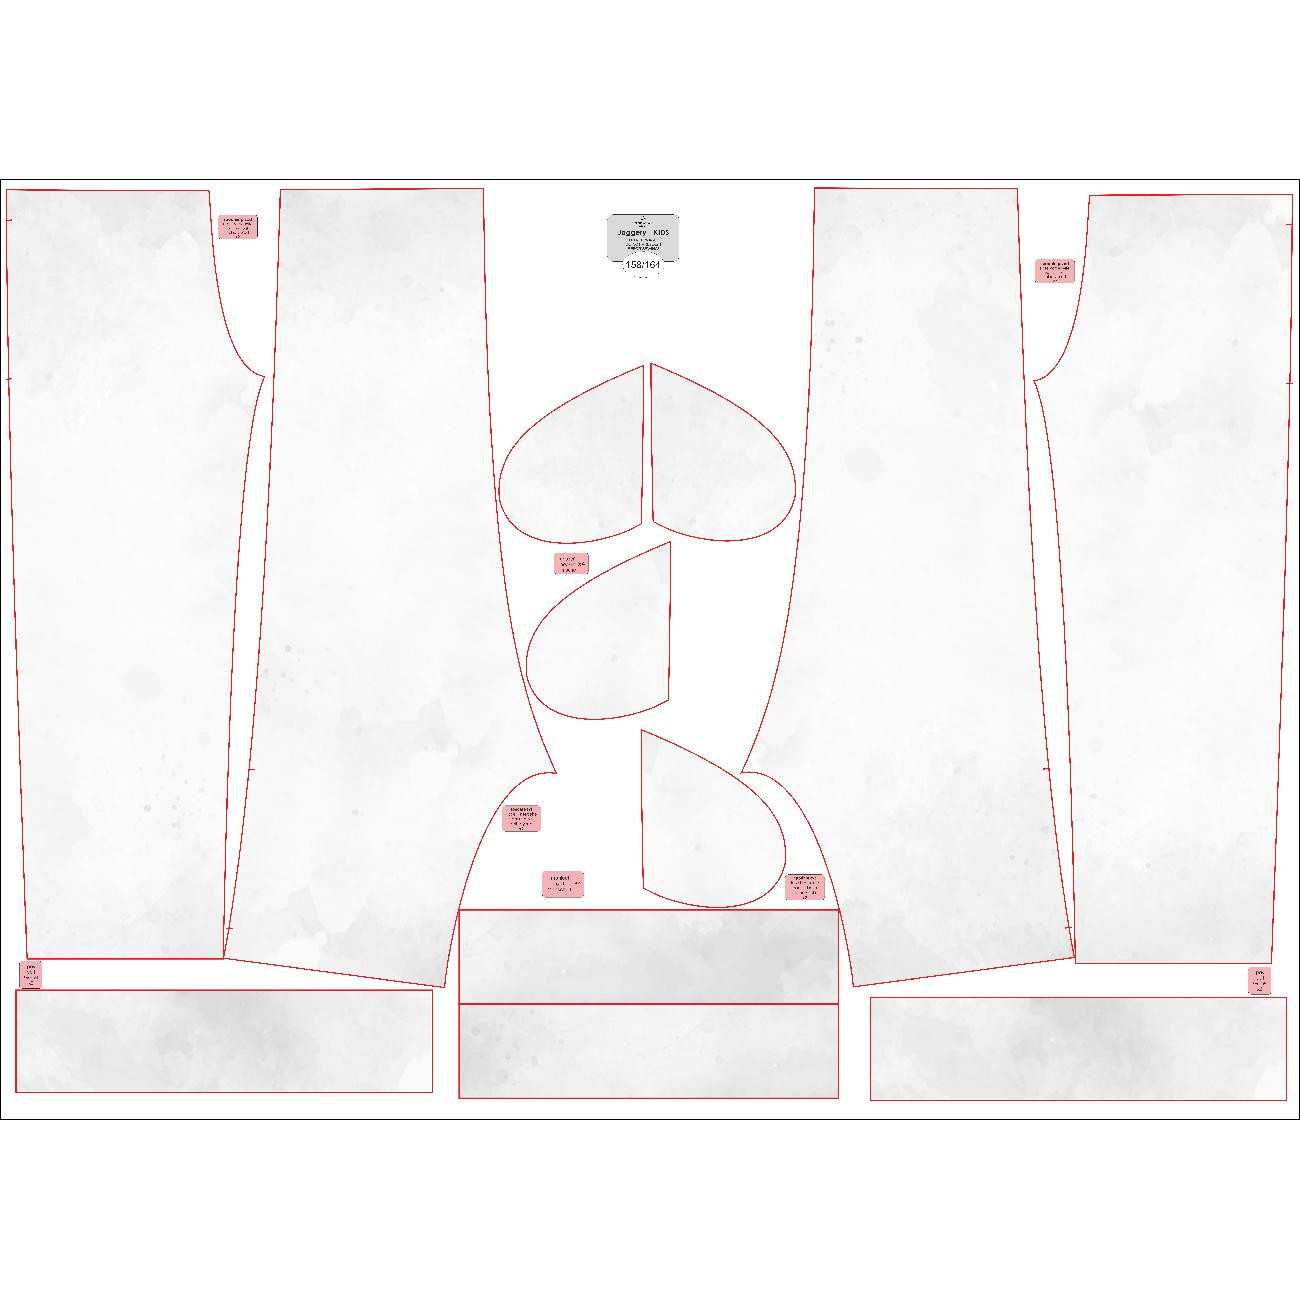 KID'S JOGGERS (ROBIN) - WHITE - sewing set